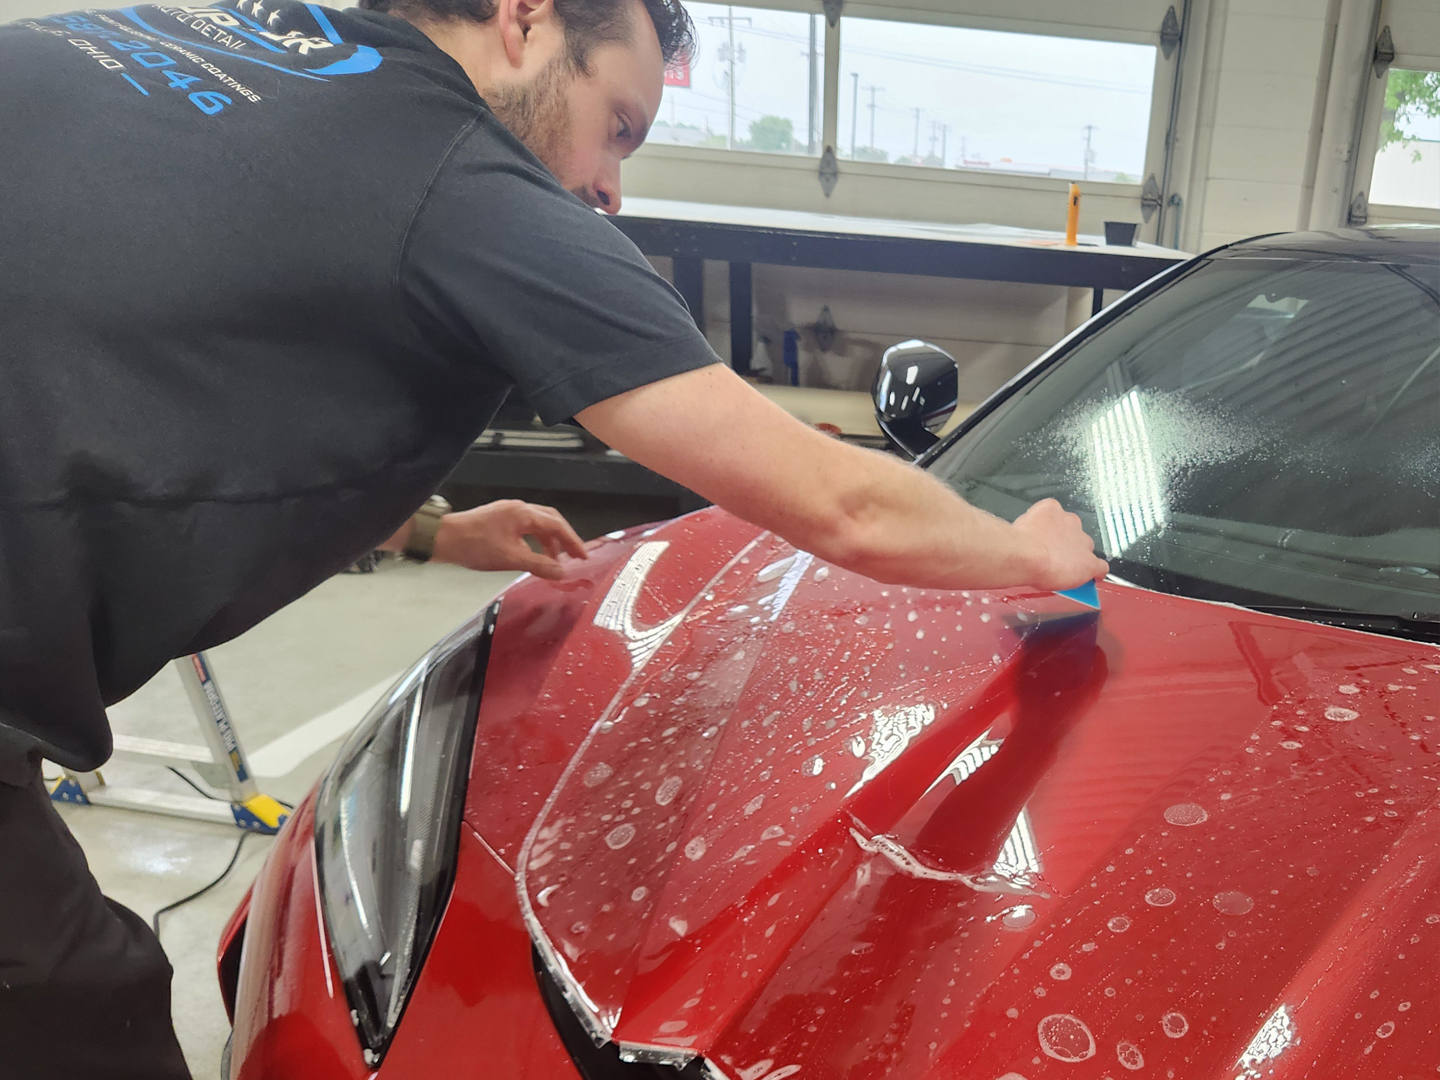 Superior Ohio - Providing Full Service, Professional Auto Detailing in Hartville, OH and Surrounding Areas